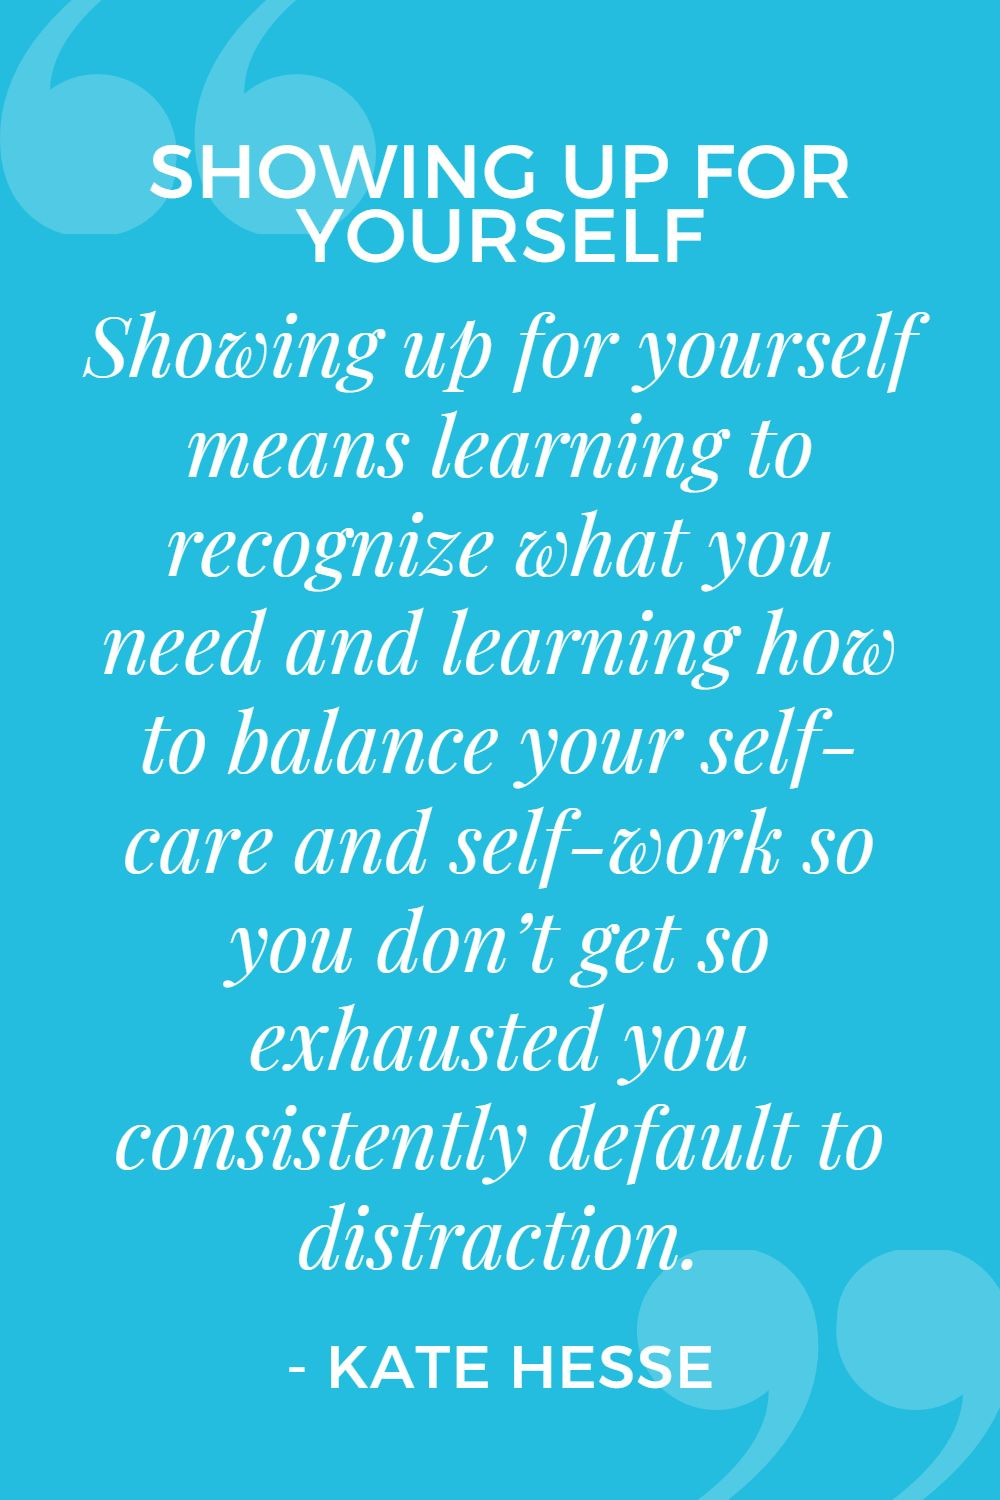 Showing up for yourself means learning to recognize what you need and learning how to balance your self-care and self-work so you don't get so exhausted you consistently default to distraction.